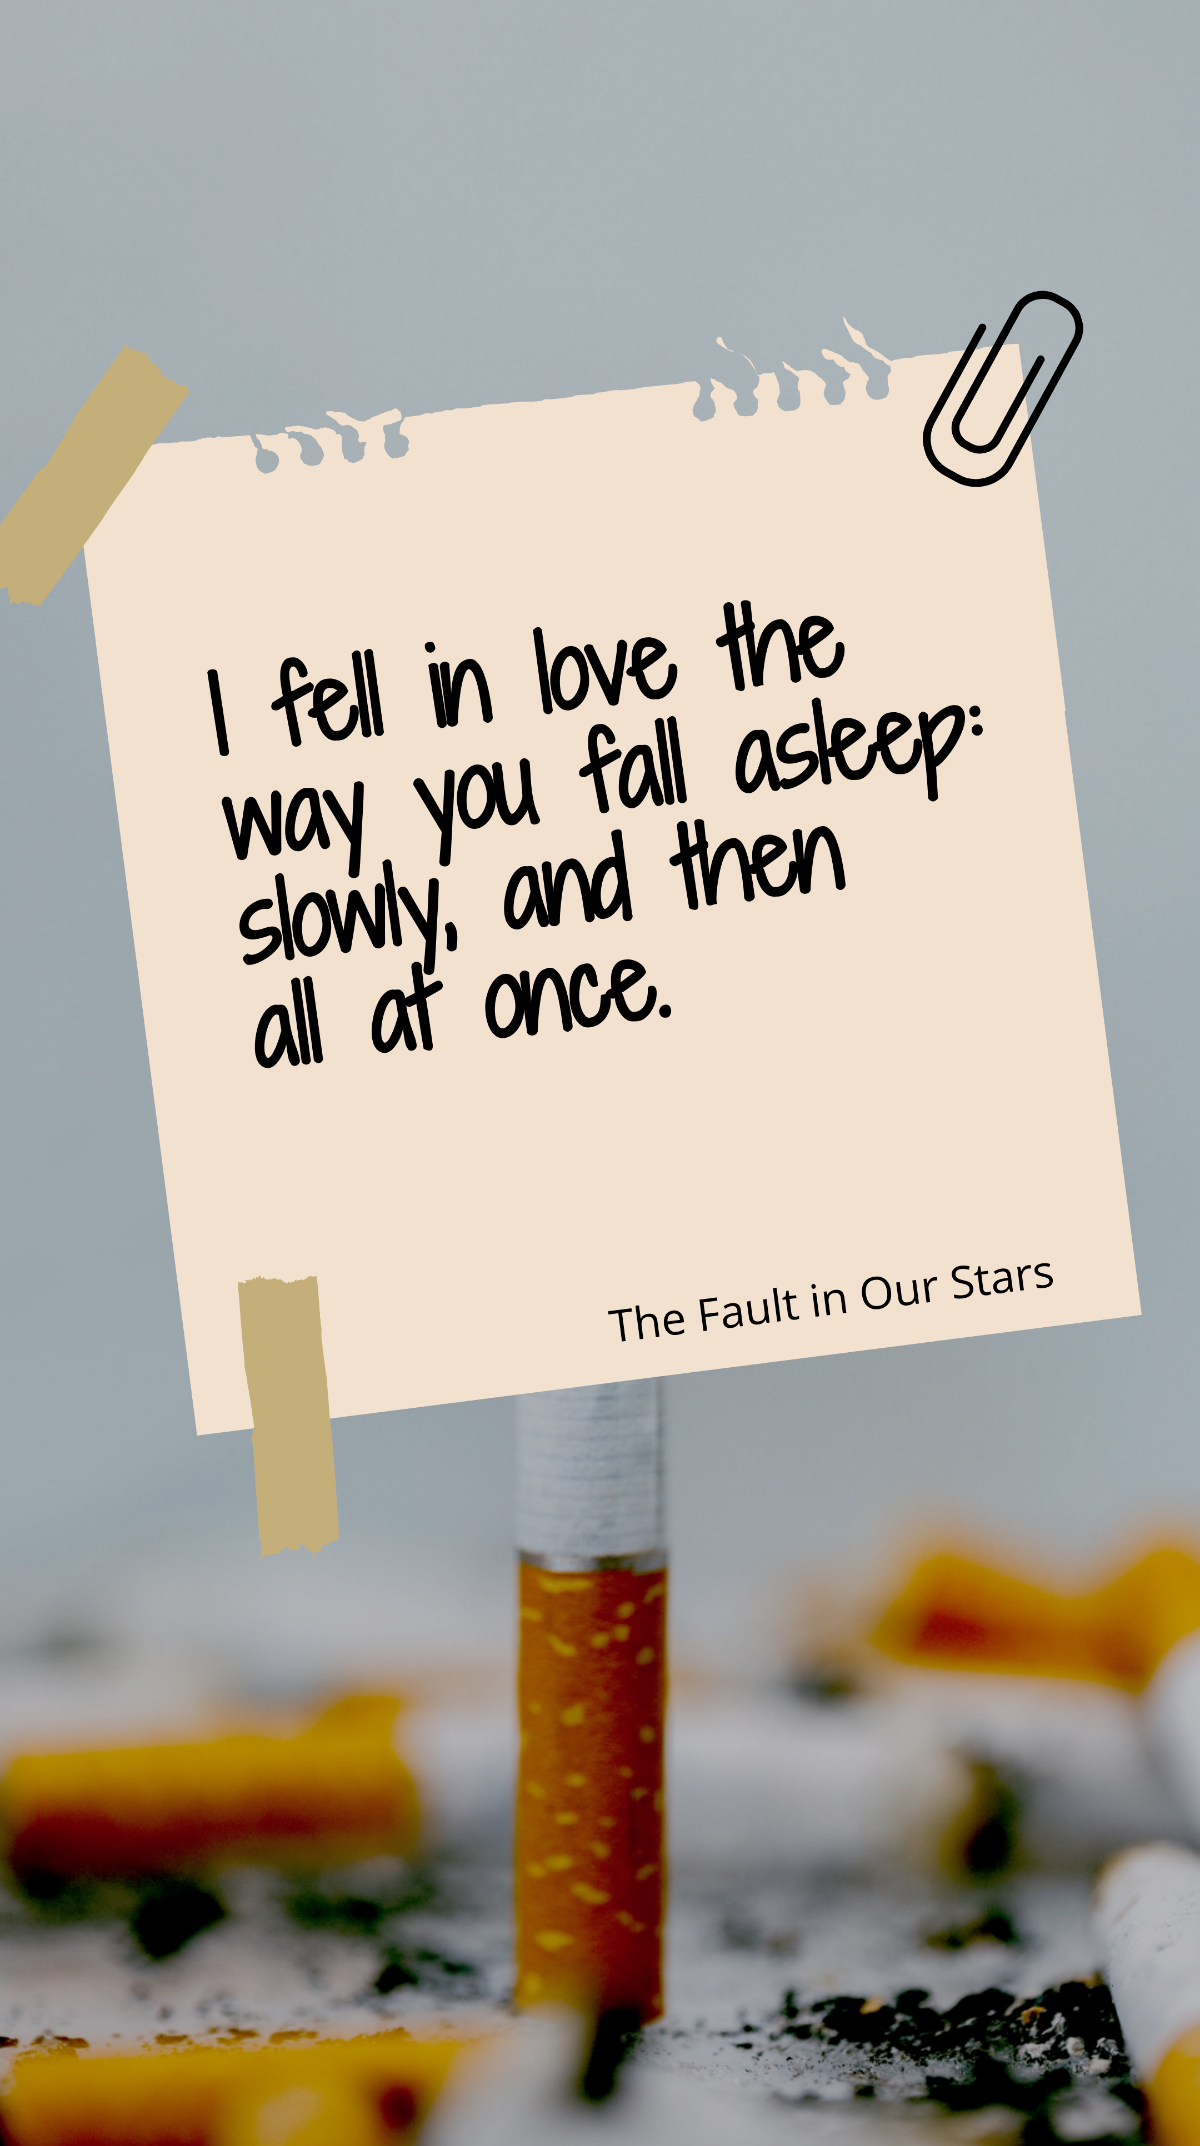 The Fault in Our Stars - “I fell in love the way you fall asleep: slowly, and then all at once.” Template